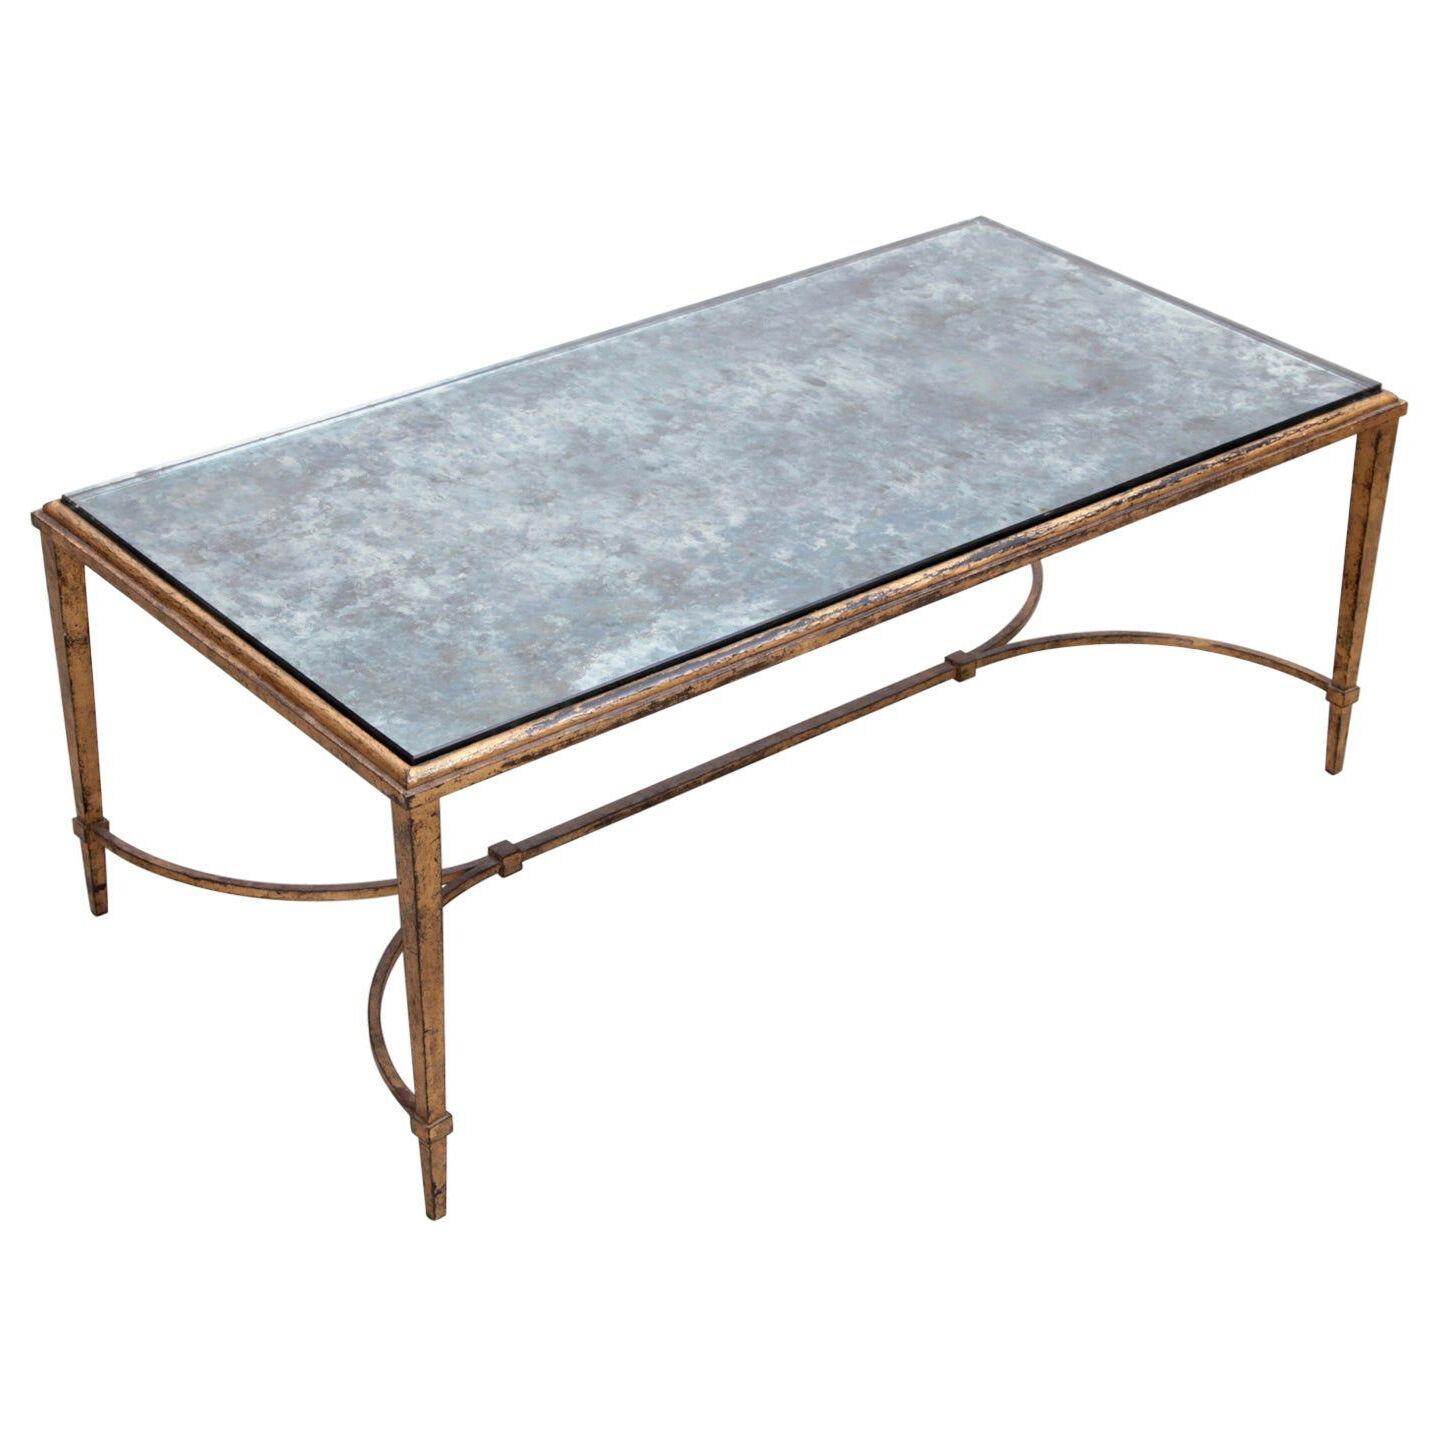 Rare Silver Plated Glass Maison Ramsay Coffee Table in Gold Leaf	